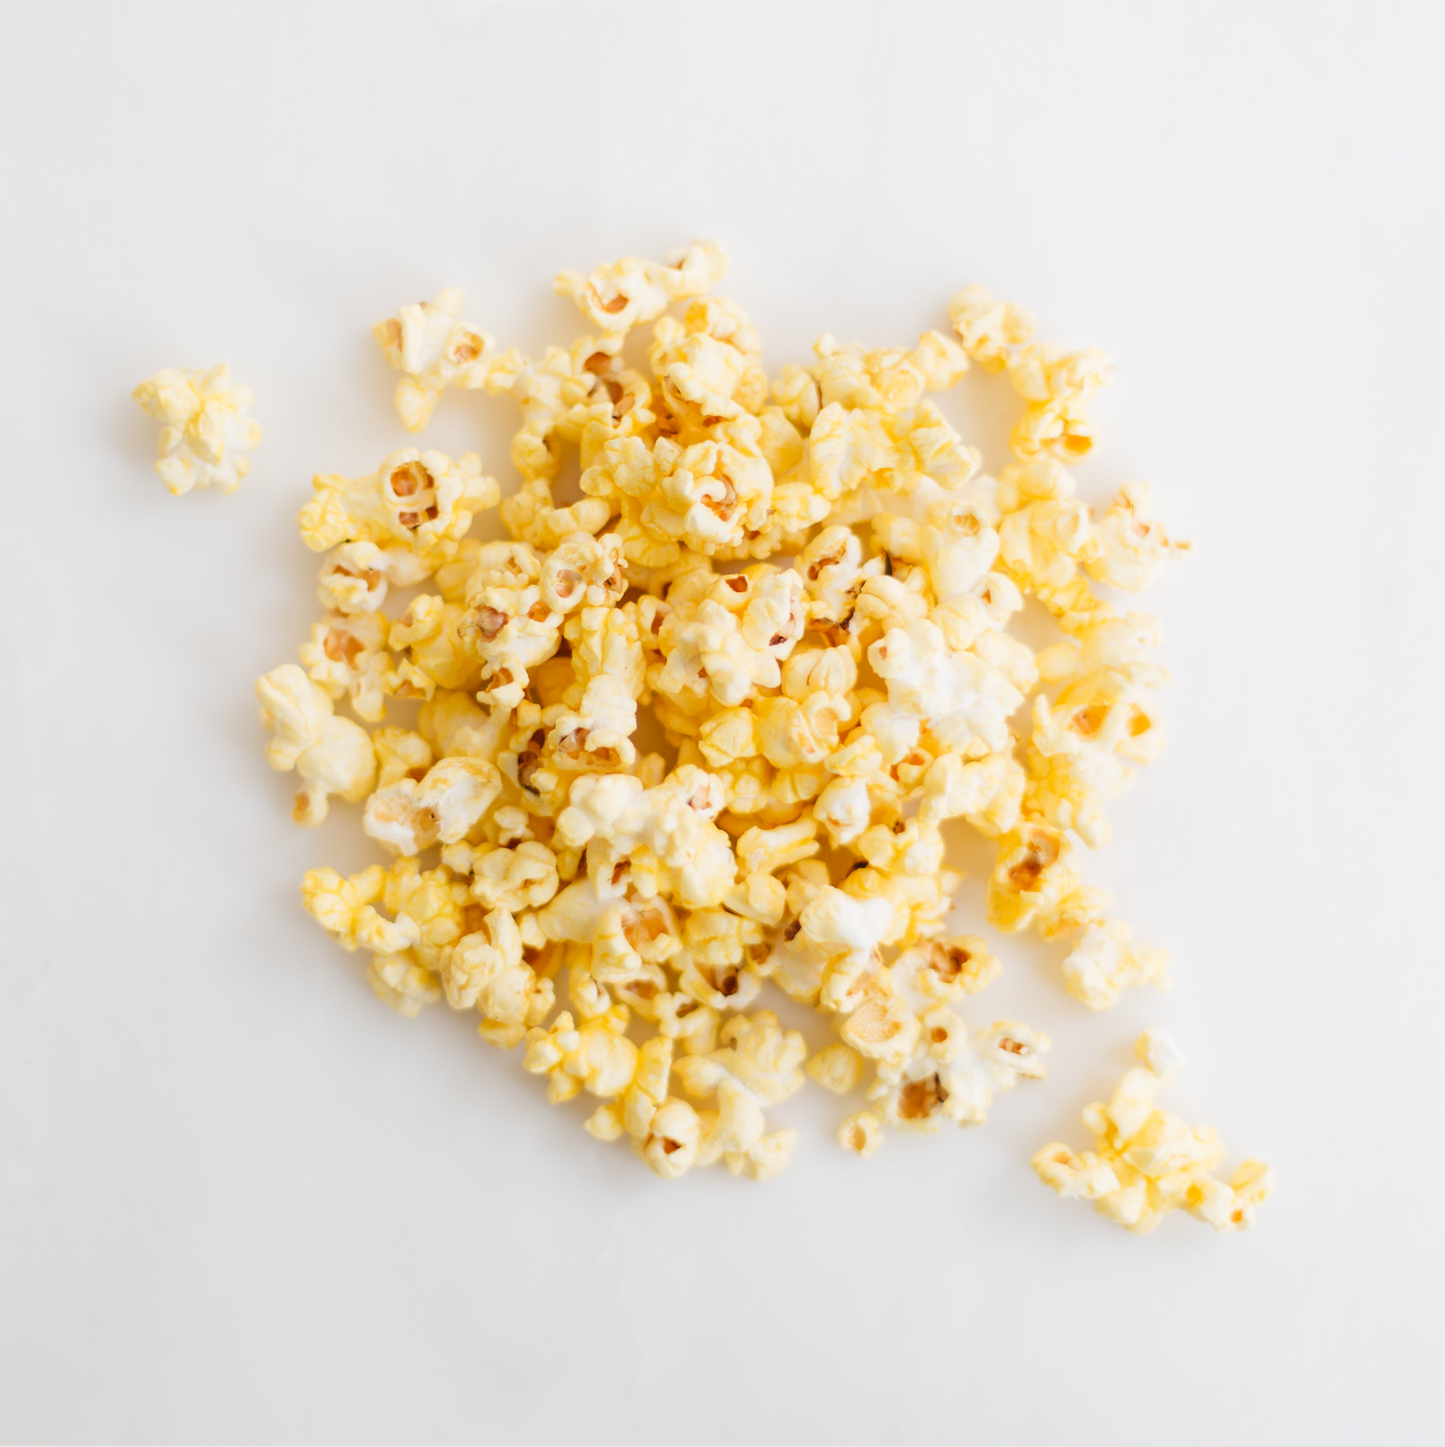 Bring the Movie Theater home with you. Popnotch Goods Movie Theater popcorn is the perfect combo of salt and butter. This is an everyday snack to keep in the house. Order online now or pick up a bag at Popnotch Goods!